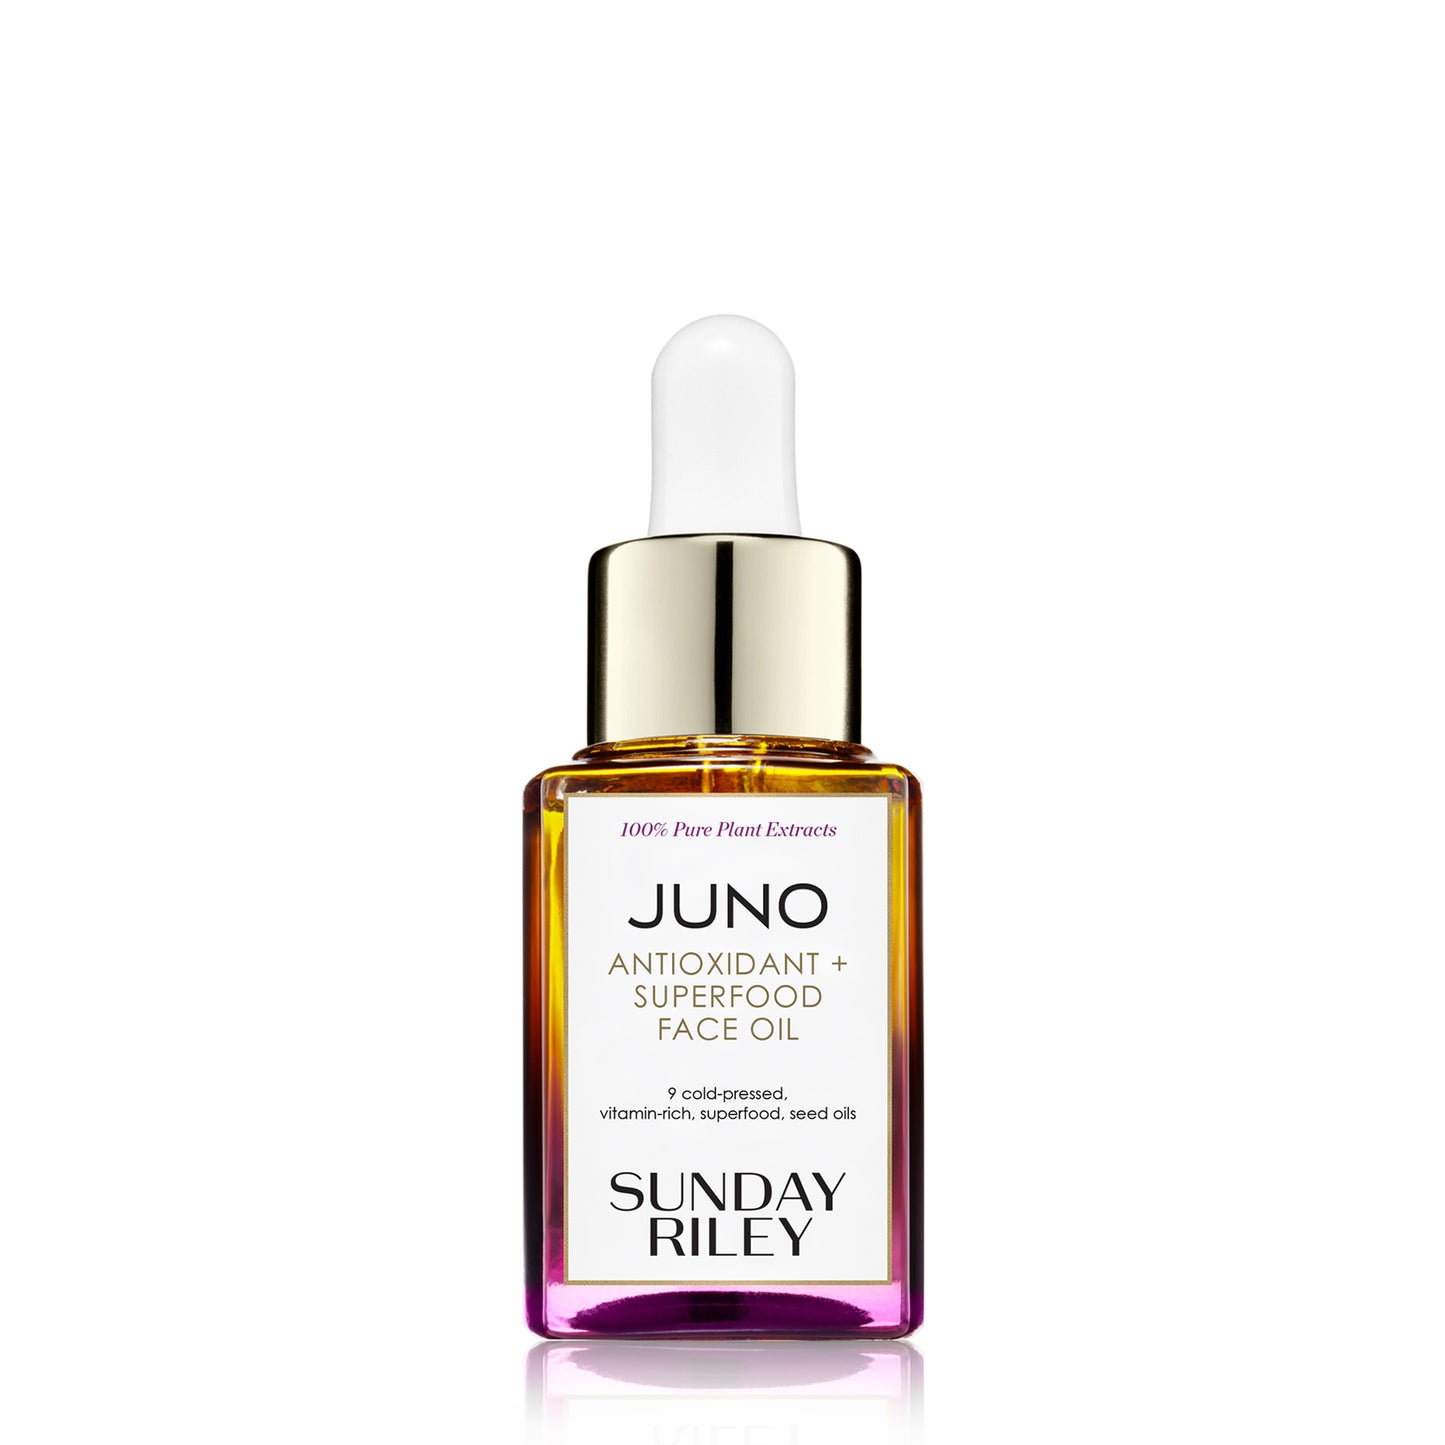 Juno Antioxidant and Superfood face oil, yellow to pink gradient glass bottle with silicon dropper